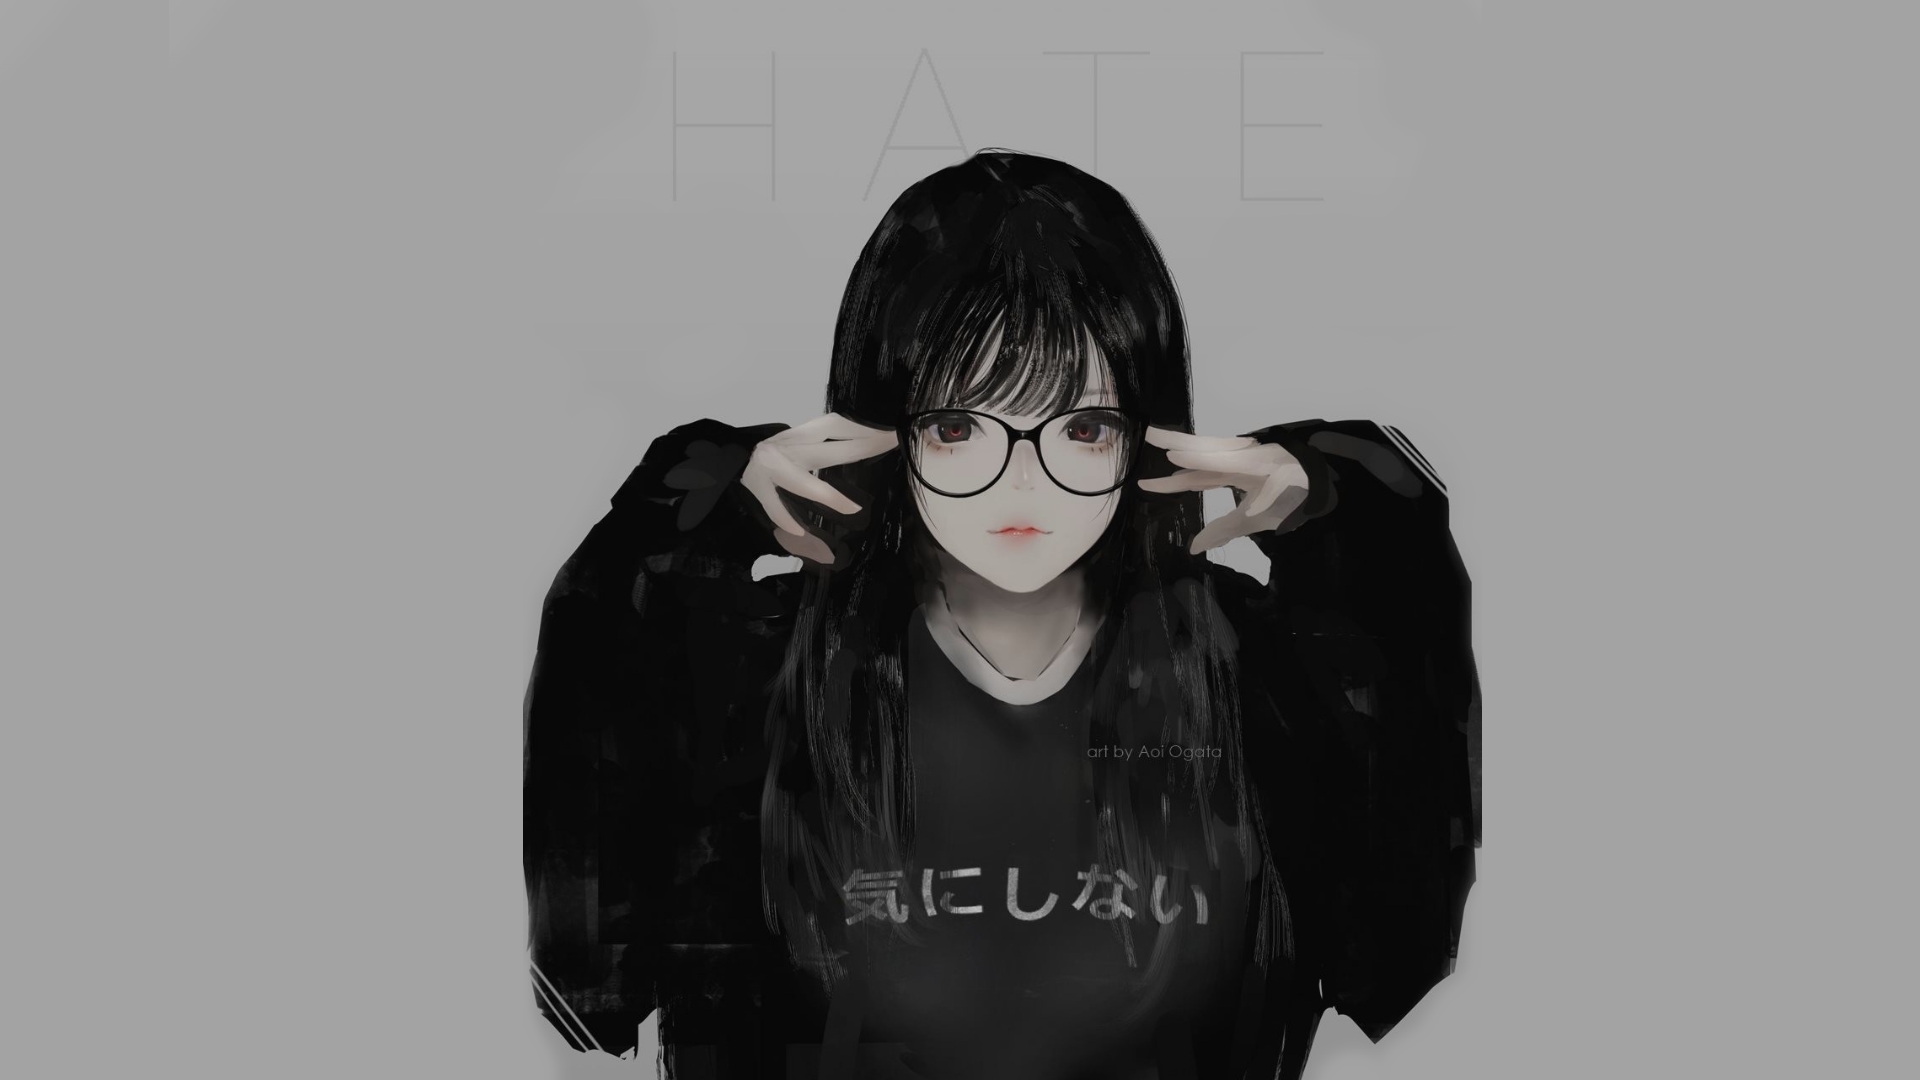 Anime 1920x1080 Aoi Ogata digital art artwork illustration simple background black clothing minimalism hate-chan women with glasses looking at viewer black hair original characters